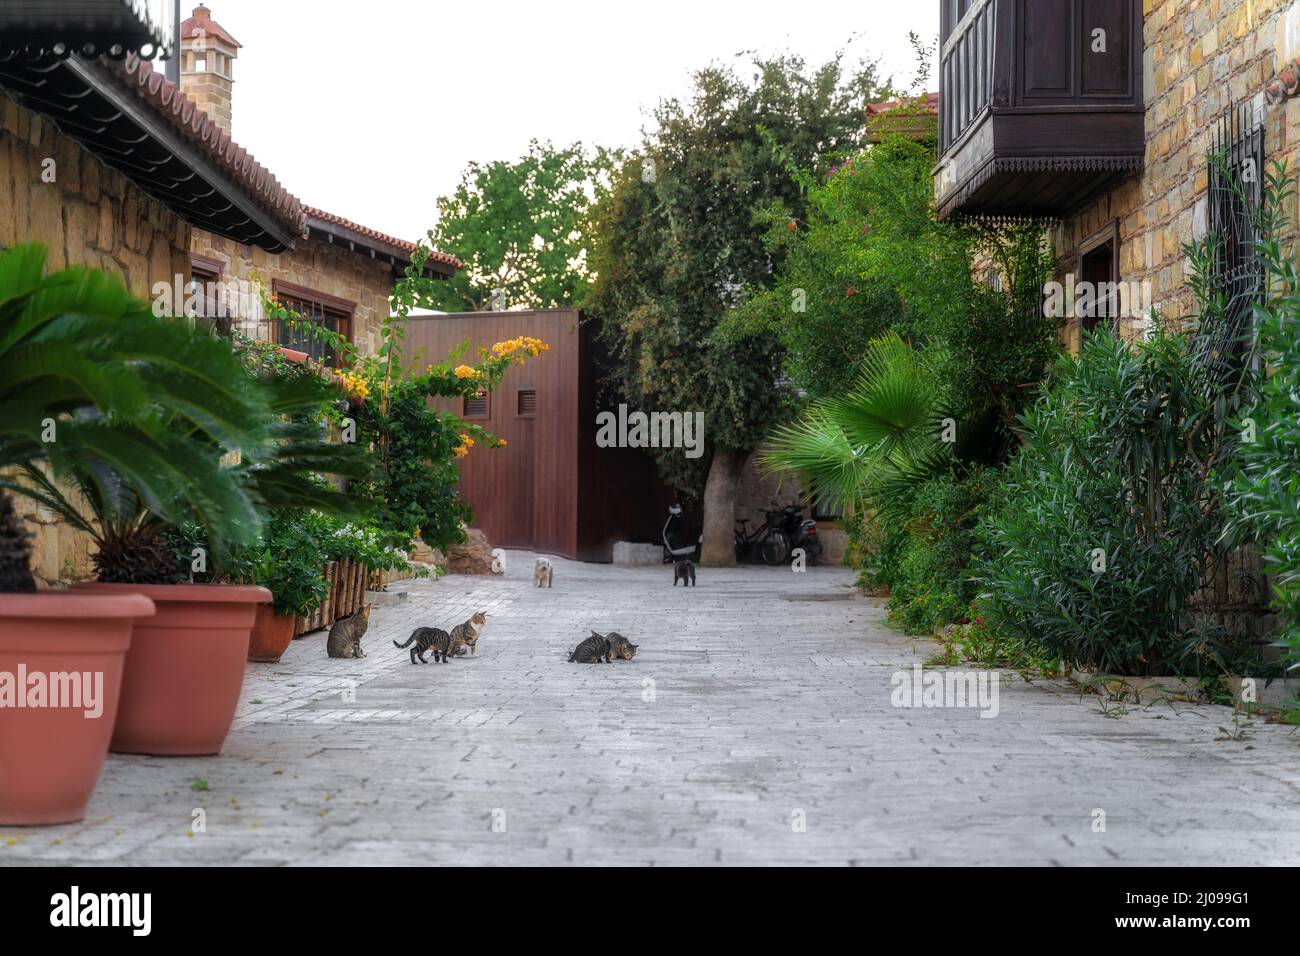 Panoramic view of old town in Turkey at dusk with handsome green eyed tabby cats. Retro vintage style. Copy space. Stock Photo